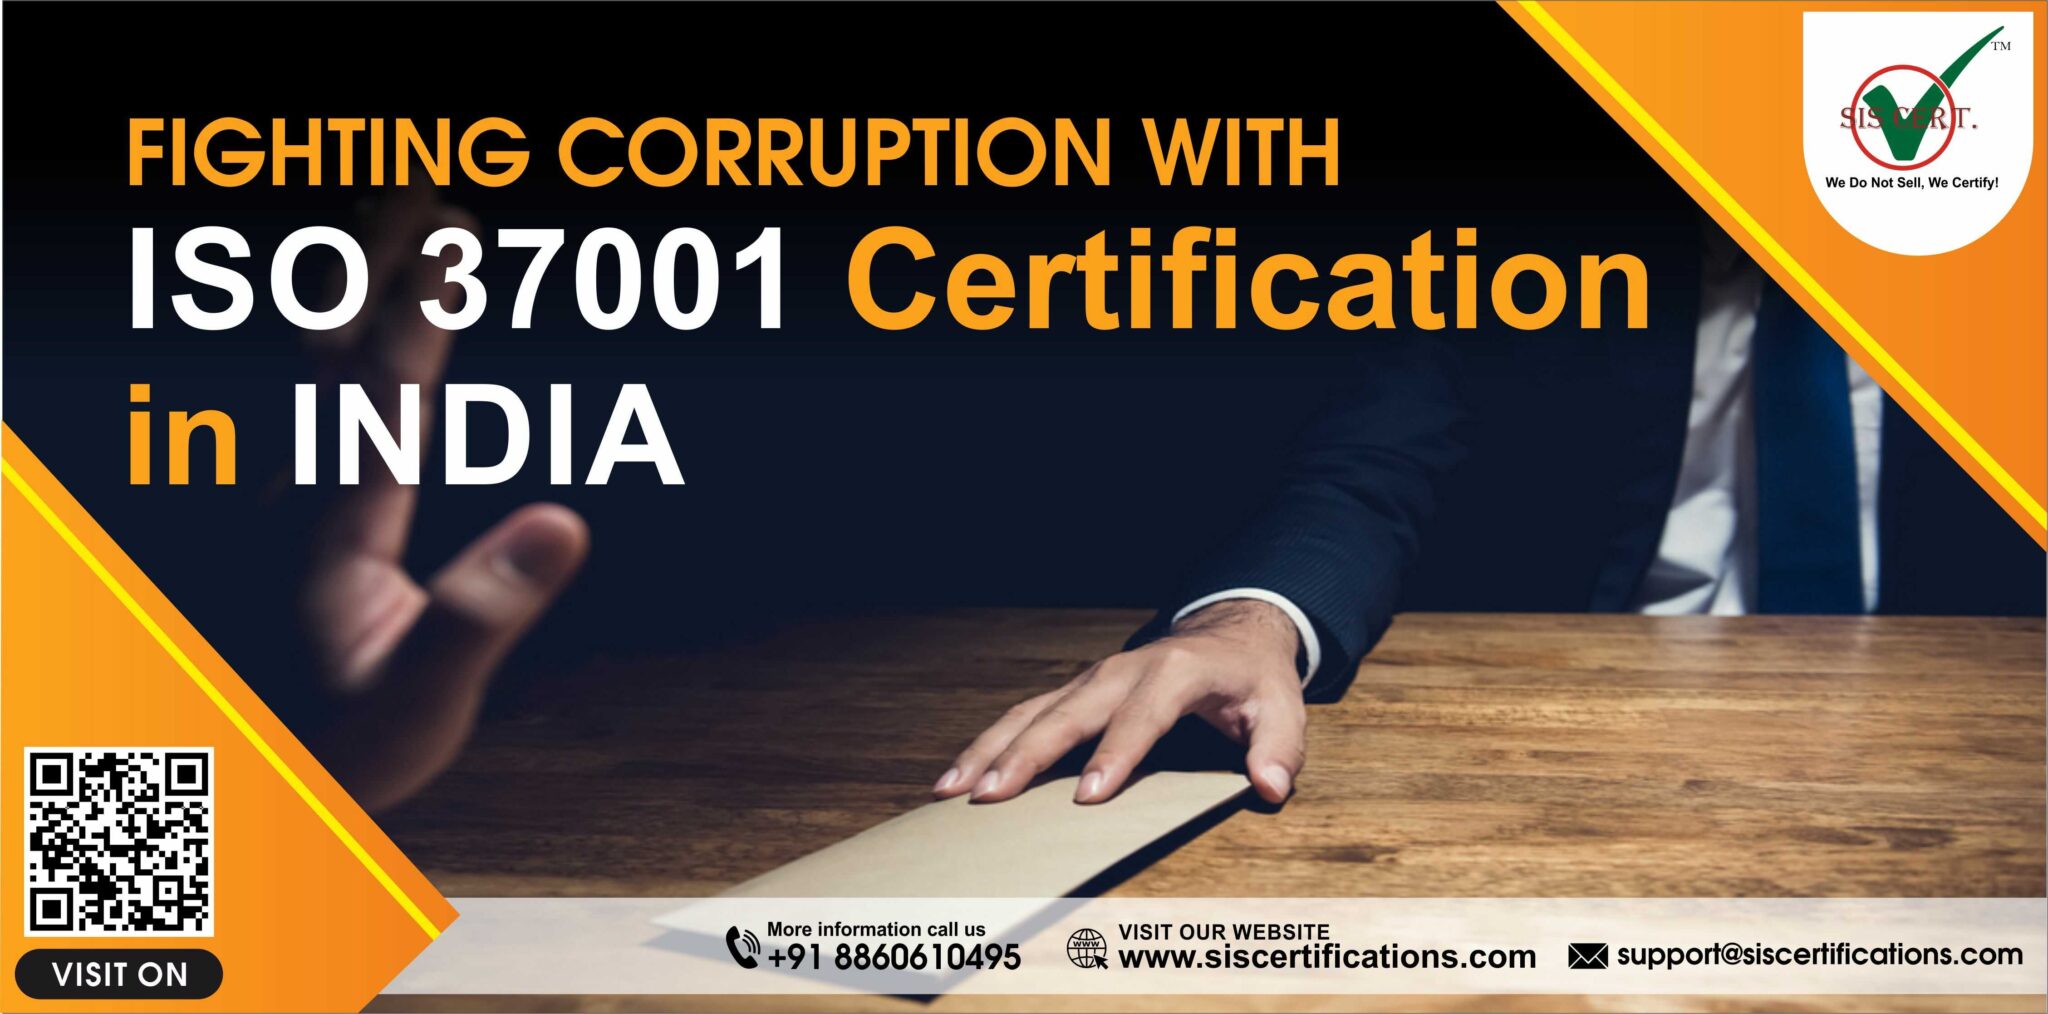 Fighting corruption with ISO 37001 Certification in India